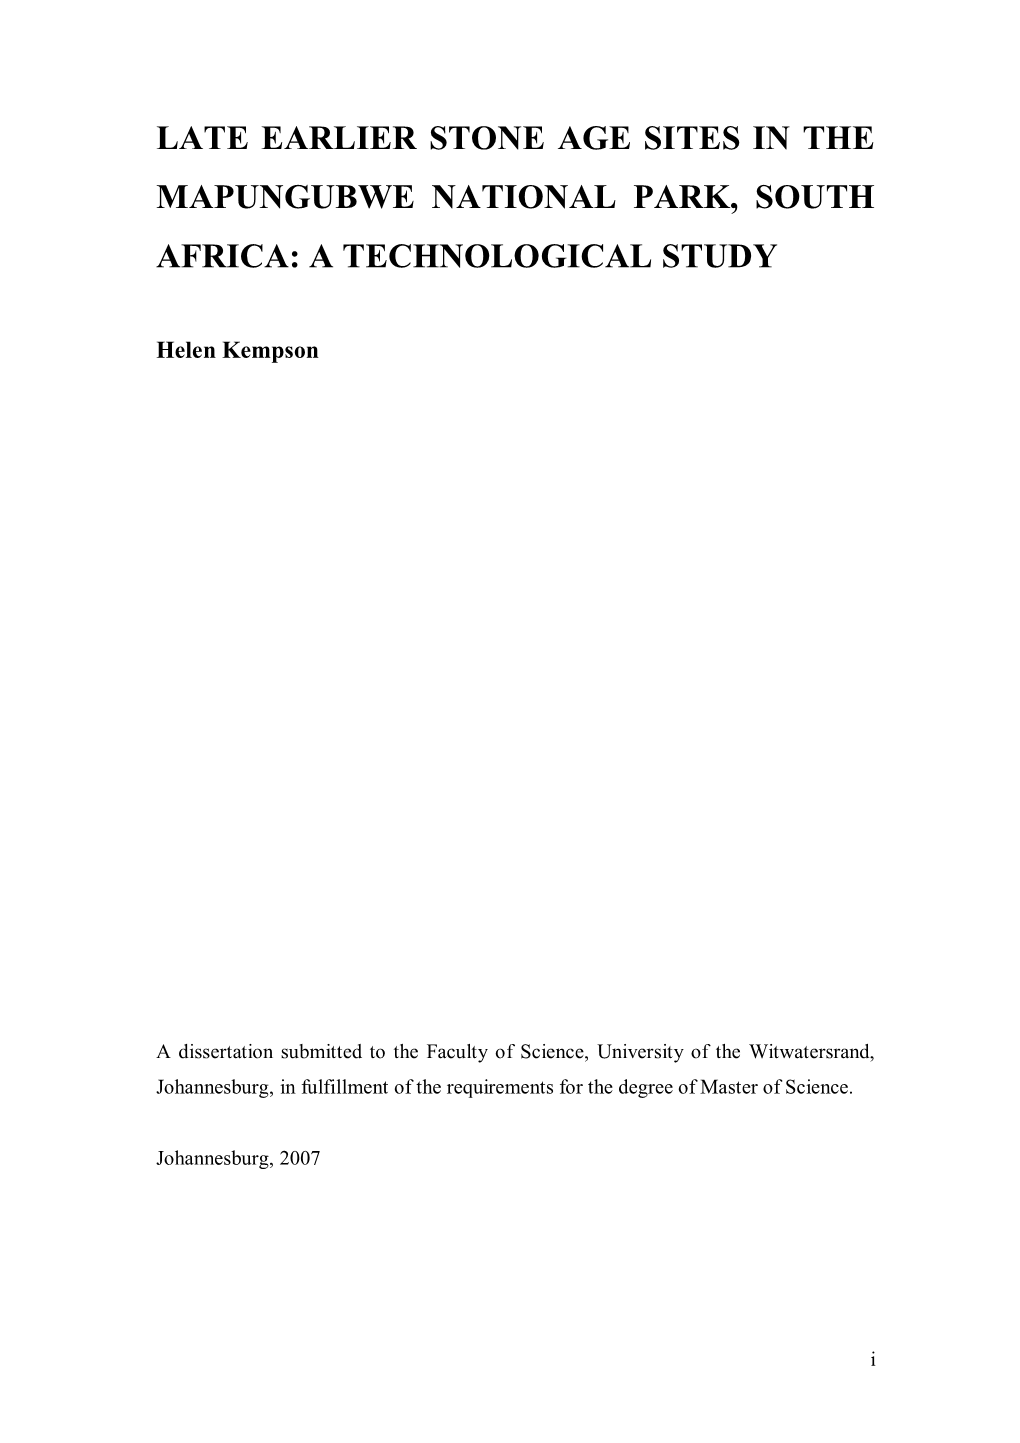 Late Earlier Stone Age Sites in the Mapungubwe National Park, South Africa: a Technological Study